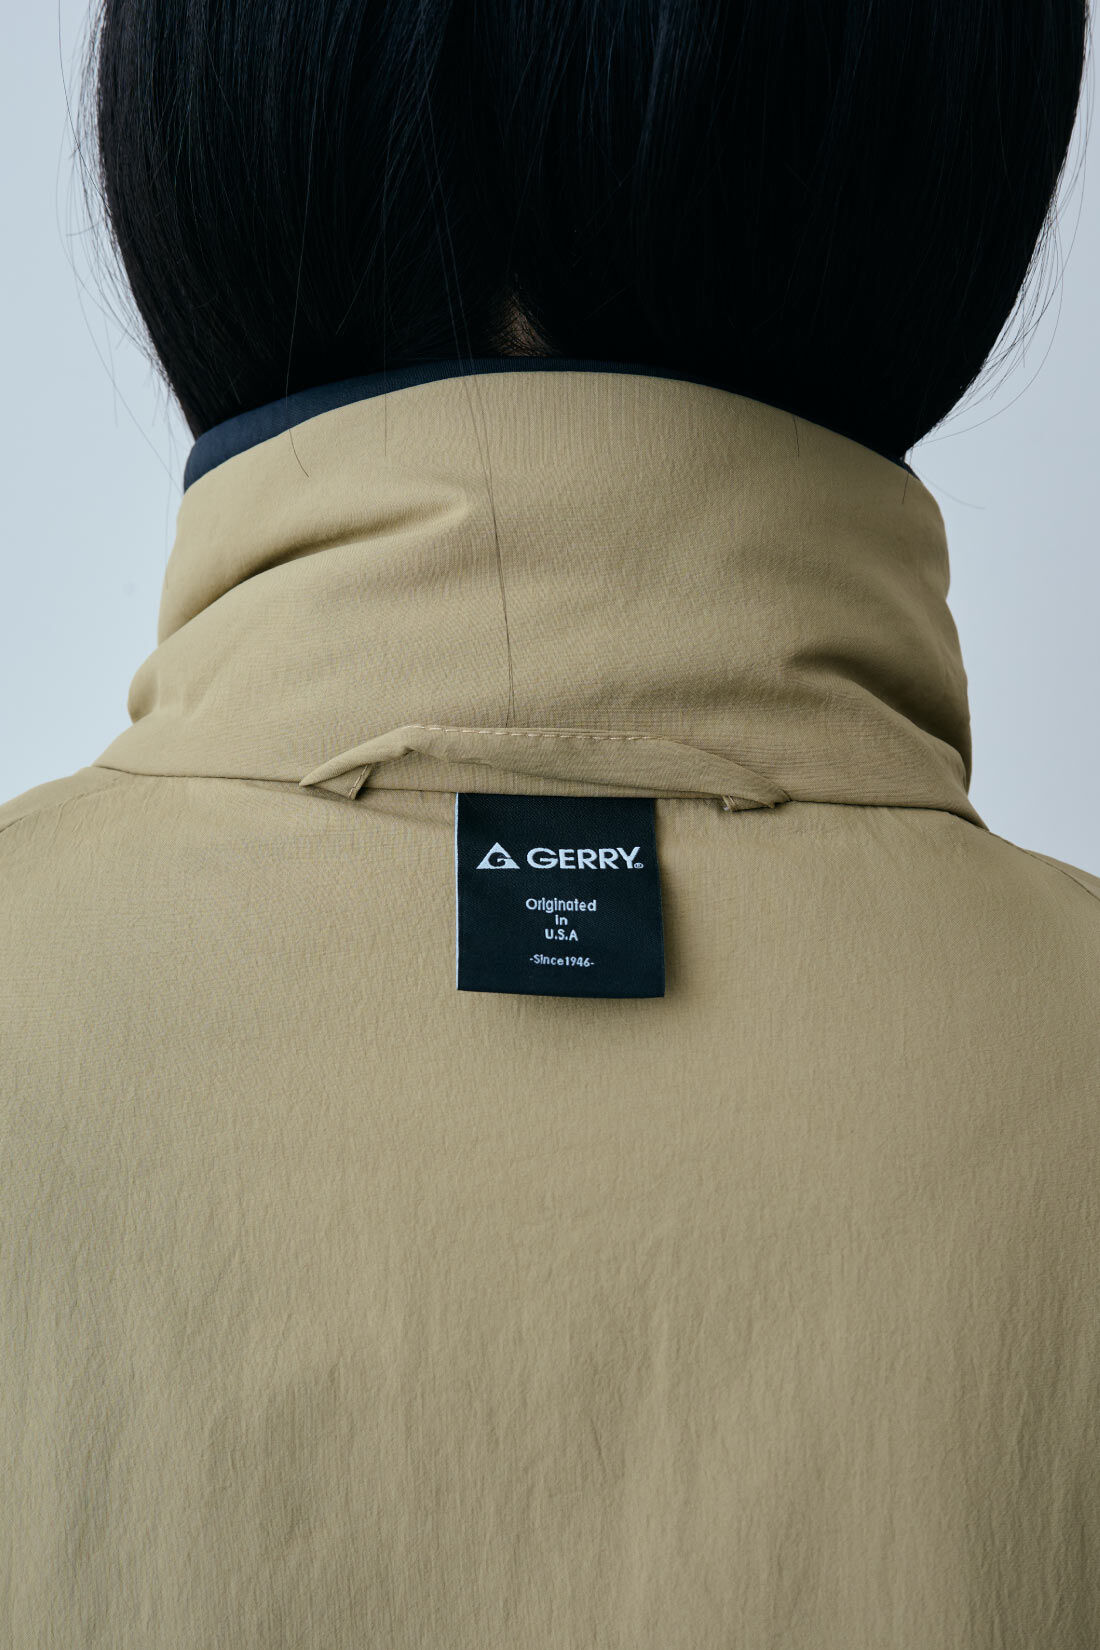 fashion special|【WEB限定・特急便】　GERRY REVERSIBLE COAT